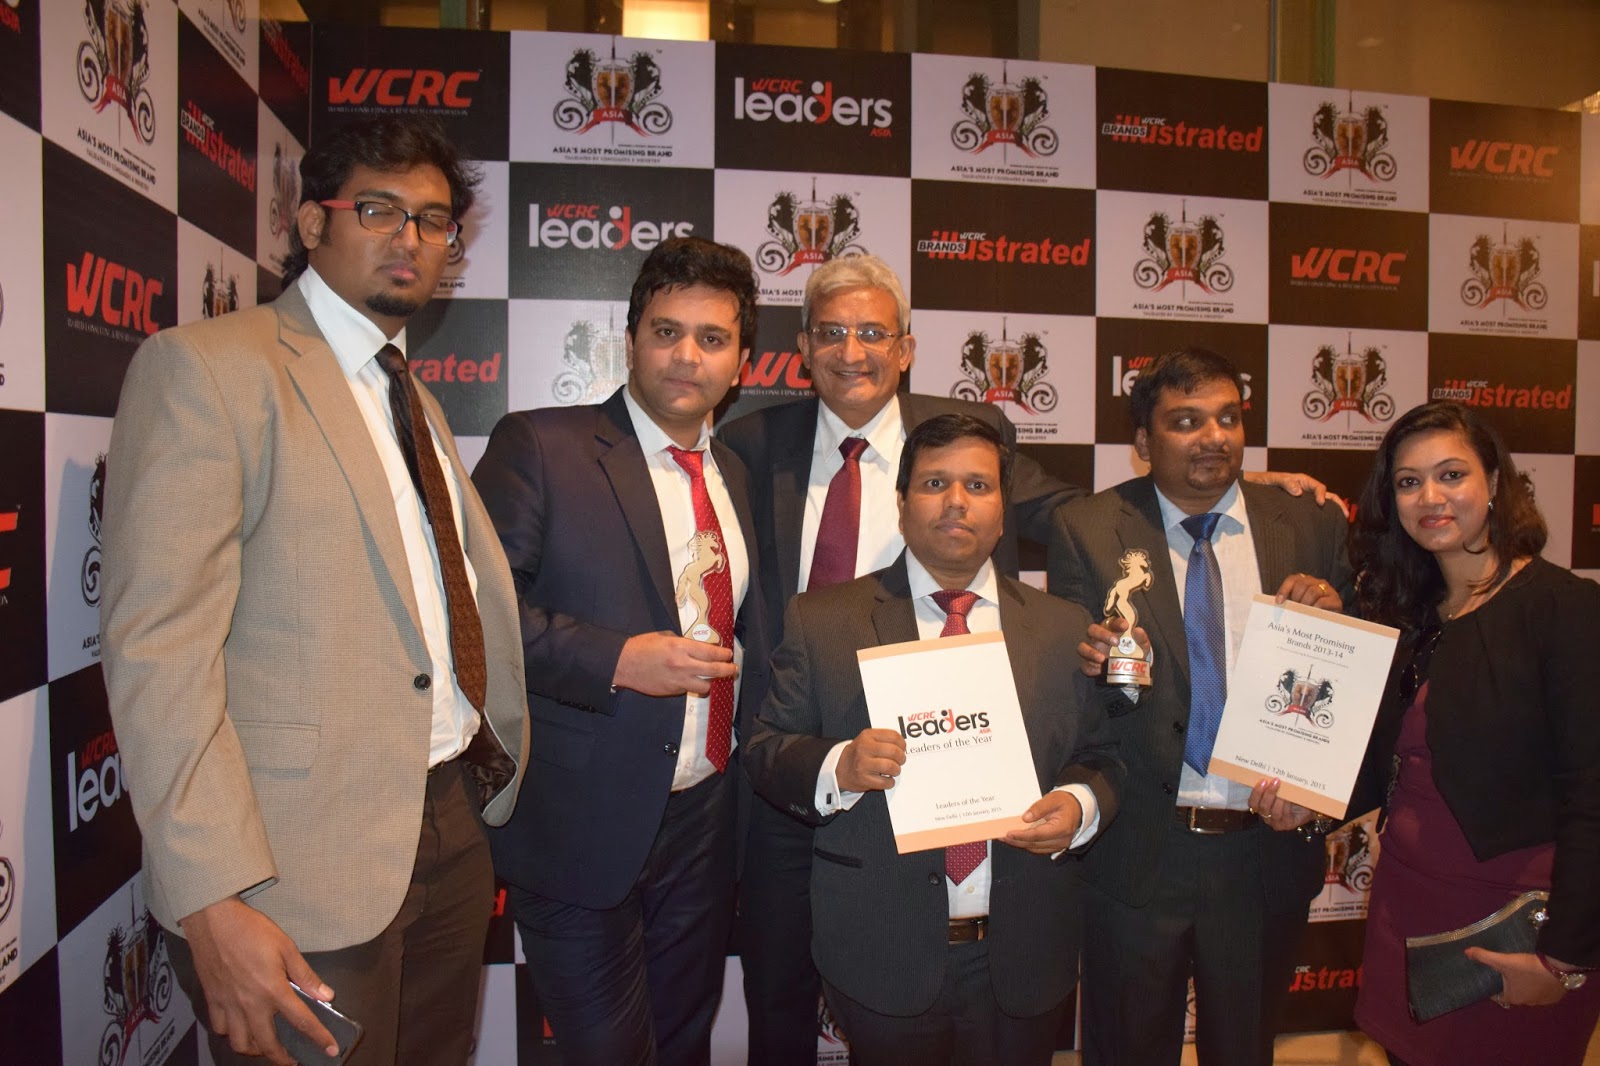 HBJ Capital Bags ‘Asia’s Most Promising Brand and leadership award’ by WCRC and KPMG India